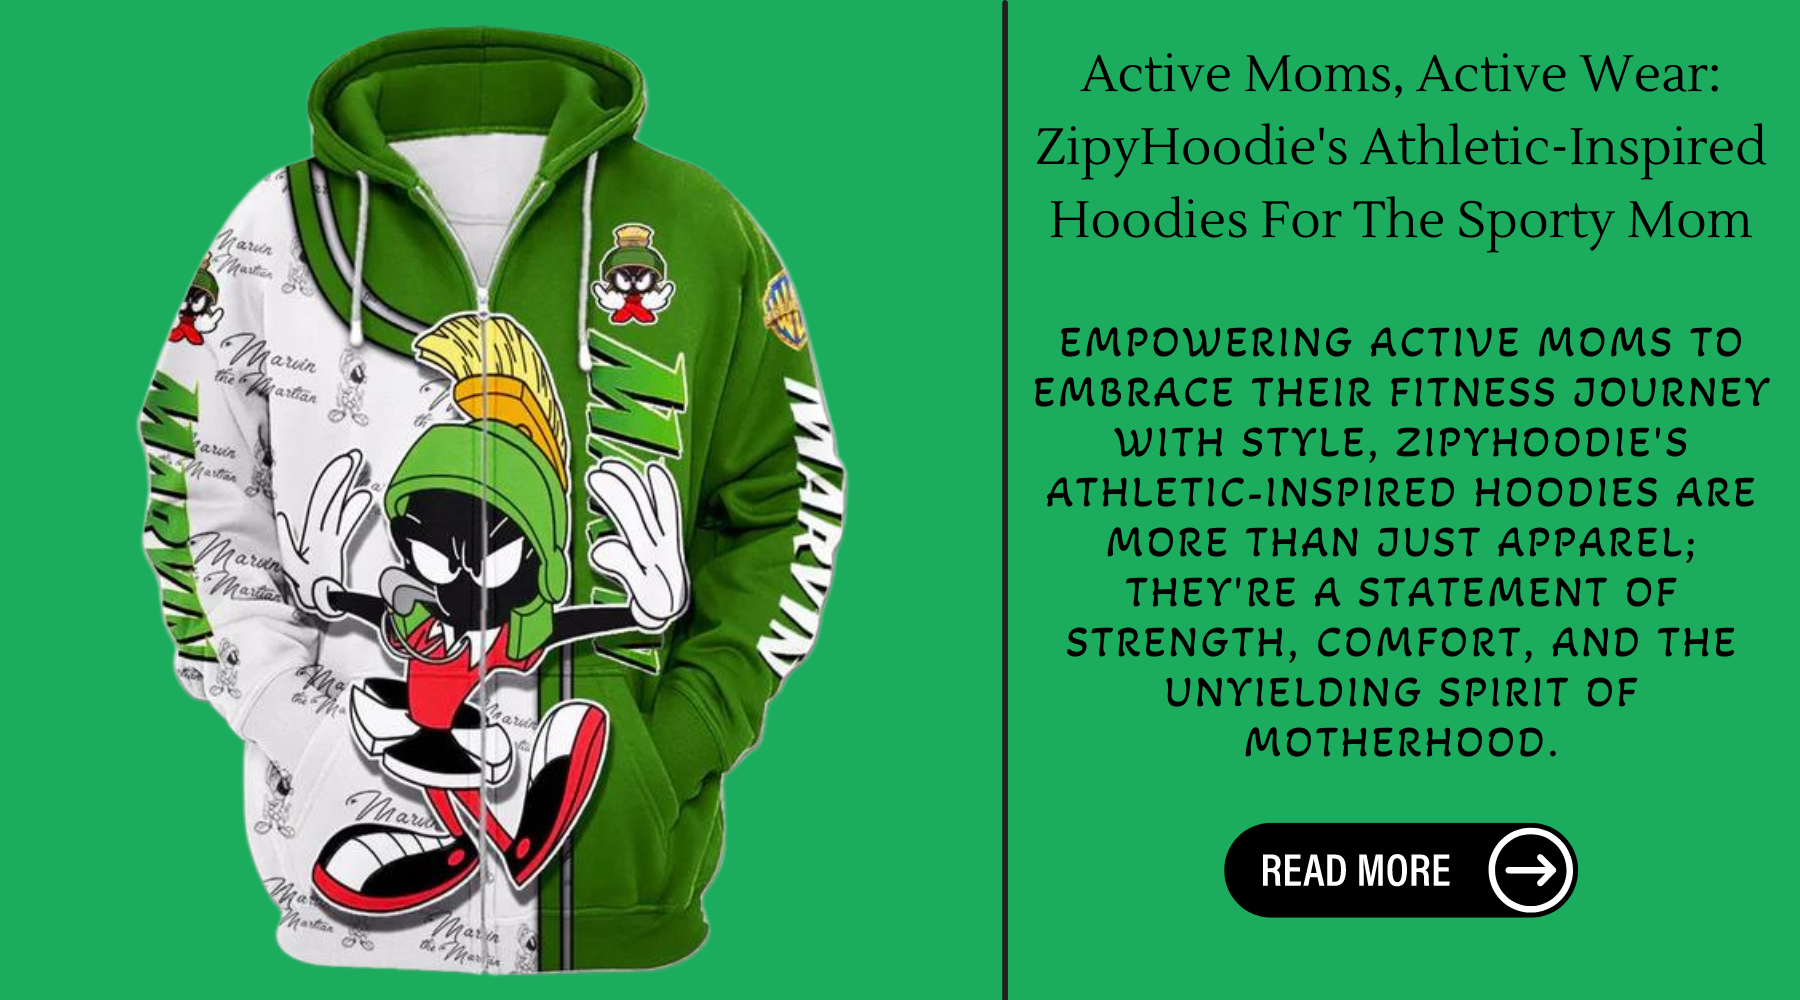 Active Moms, Active Wear: ZipyHoodie's Athletic-Inspired Hoodies For The Sporty Mom